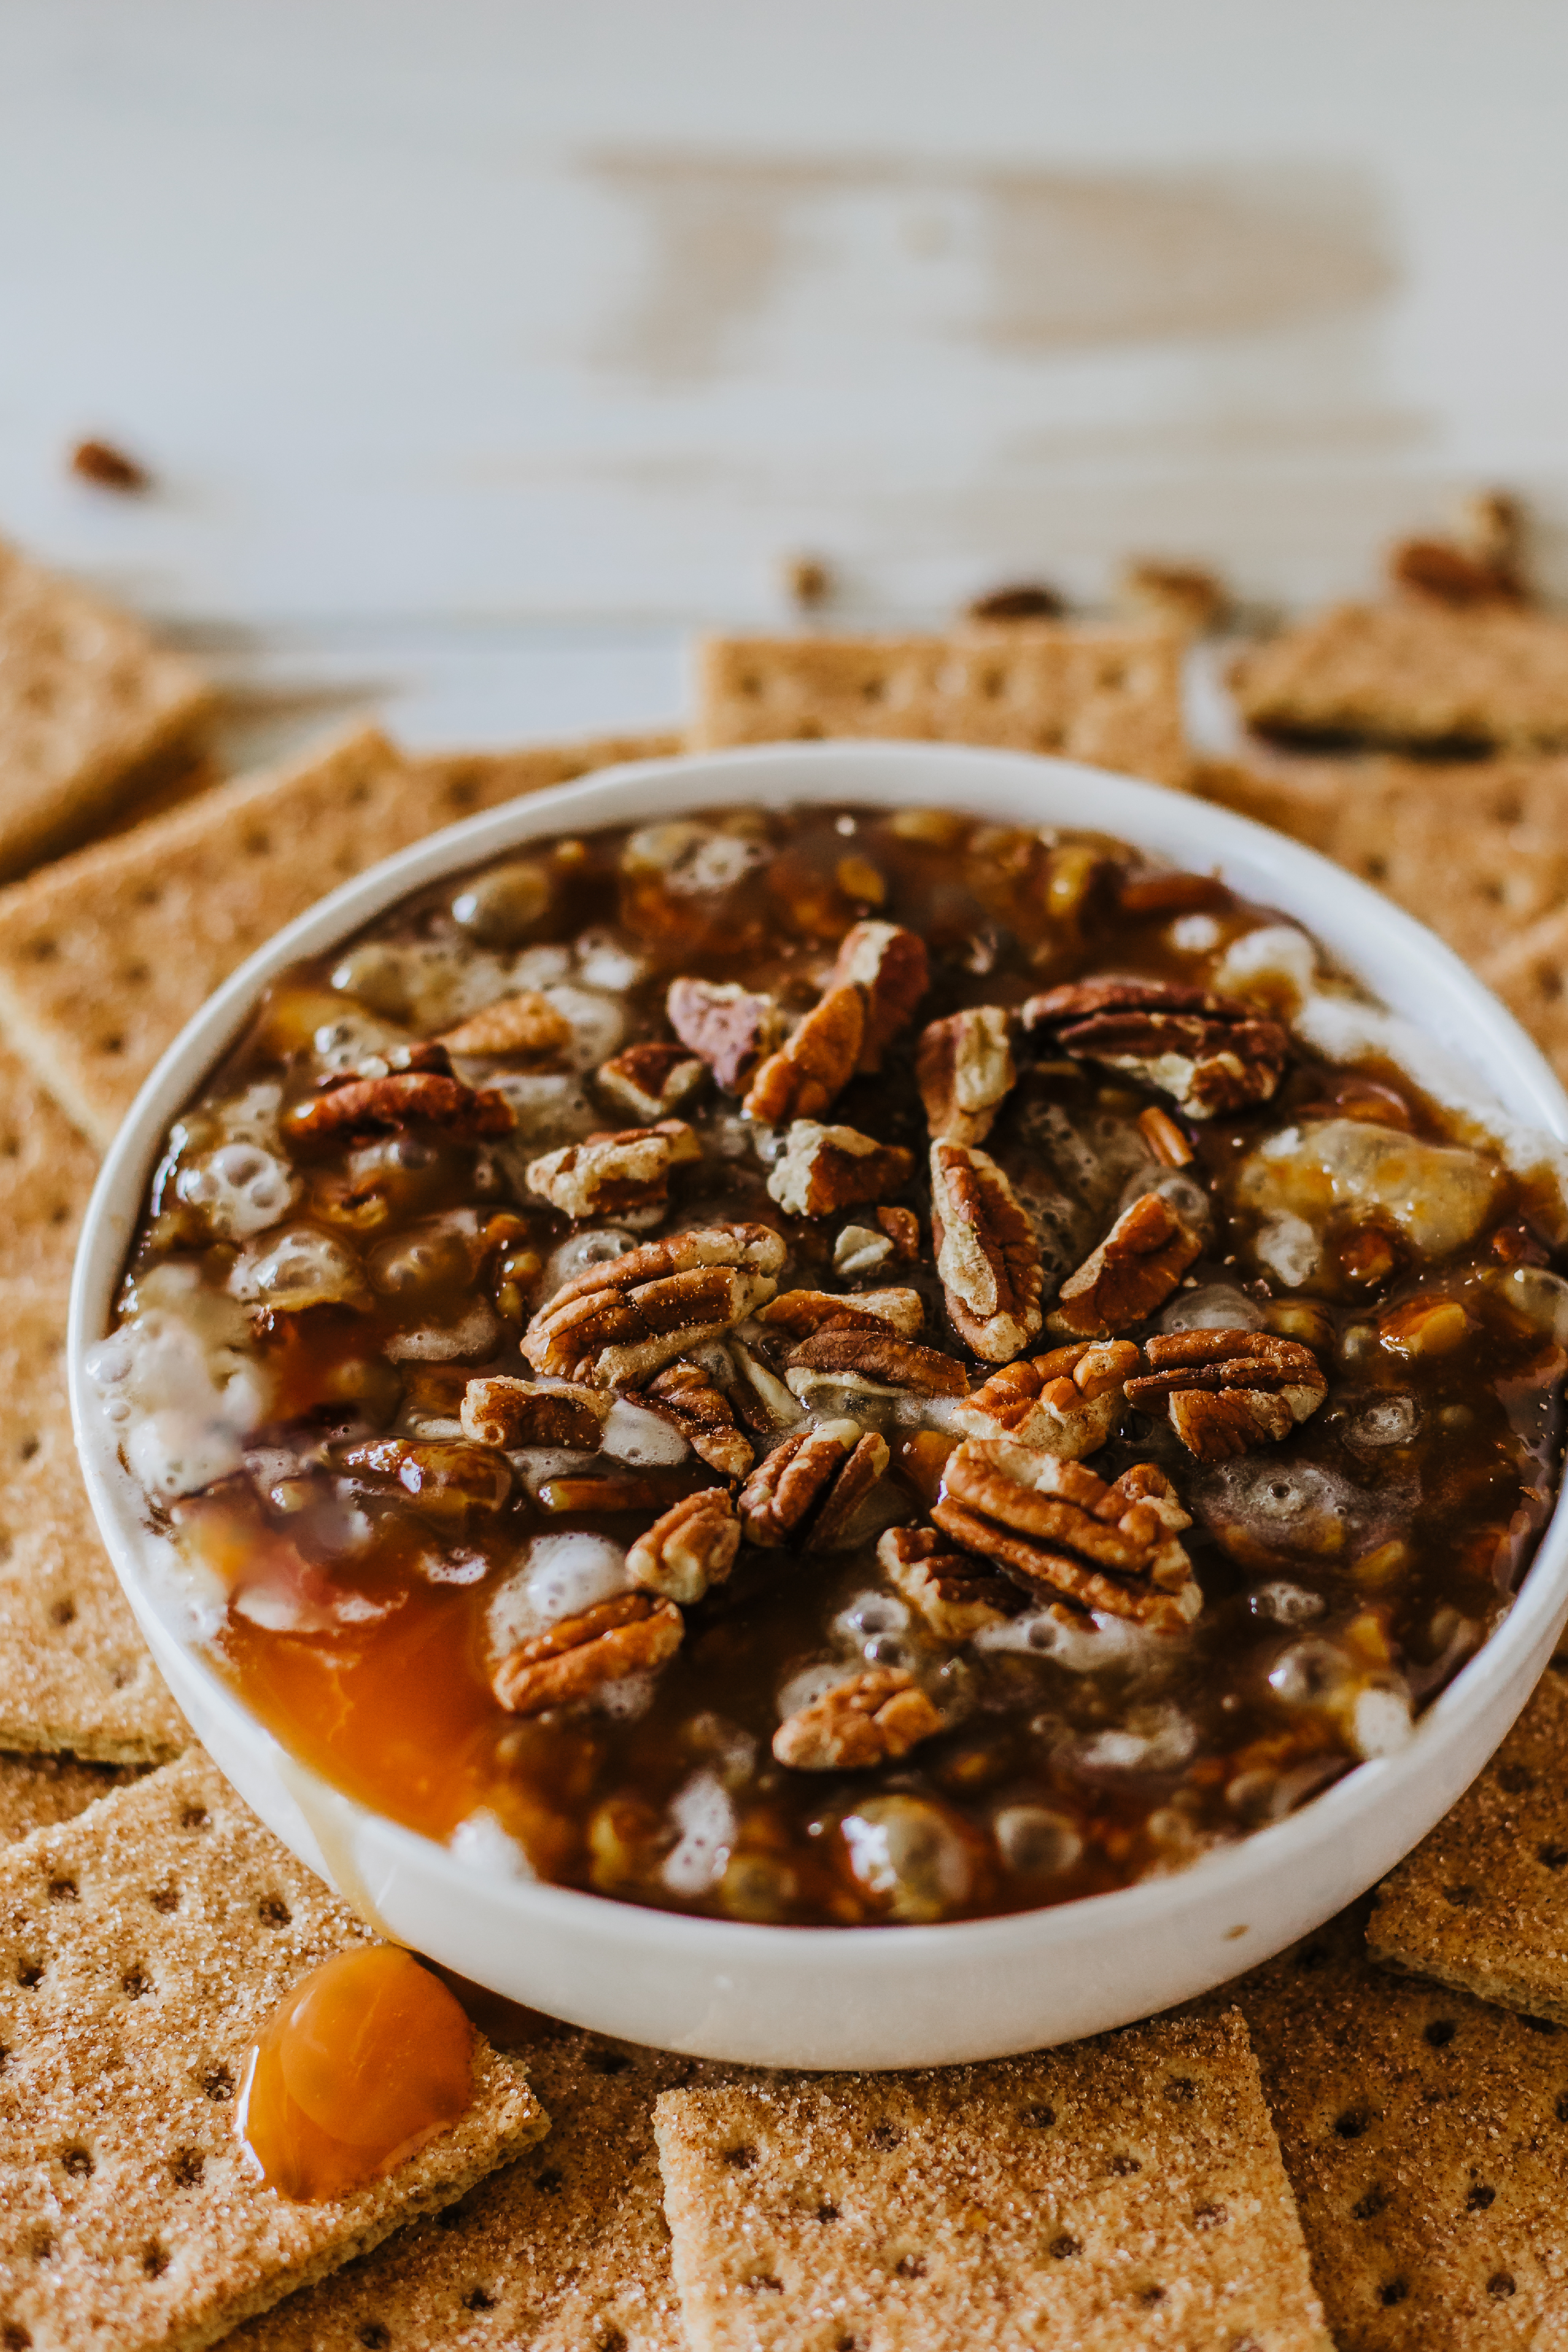 A bowl filled with pecan-topped dessert surrounded by graham crackers. Two gold spoons are placed to the right.